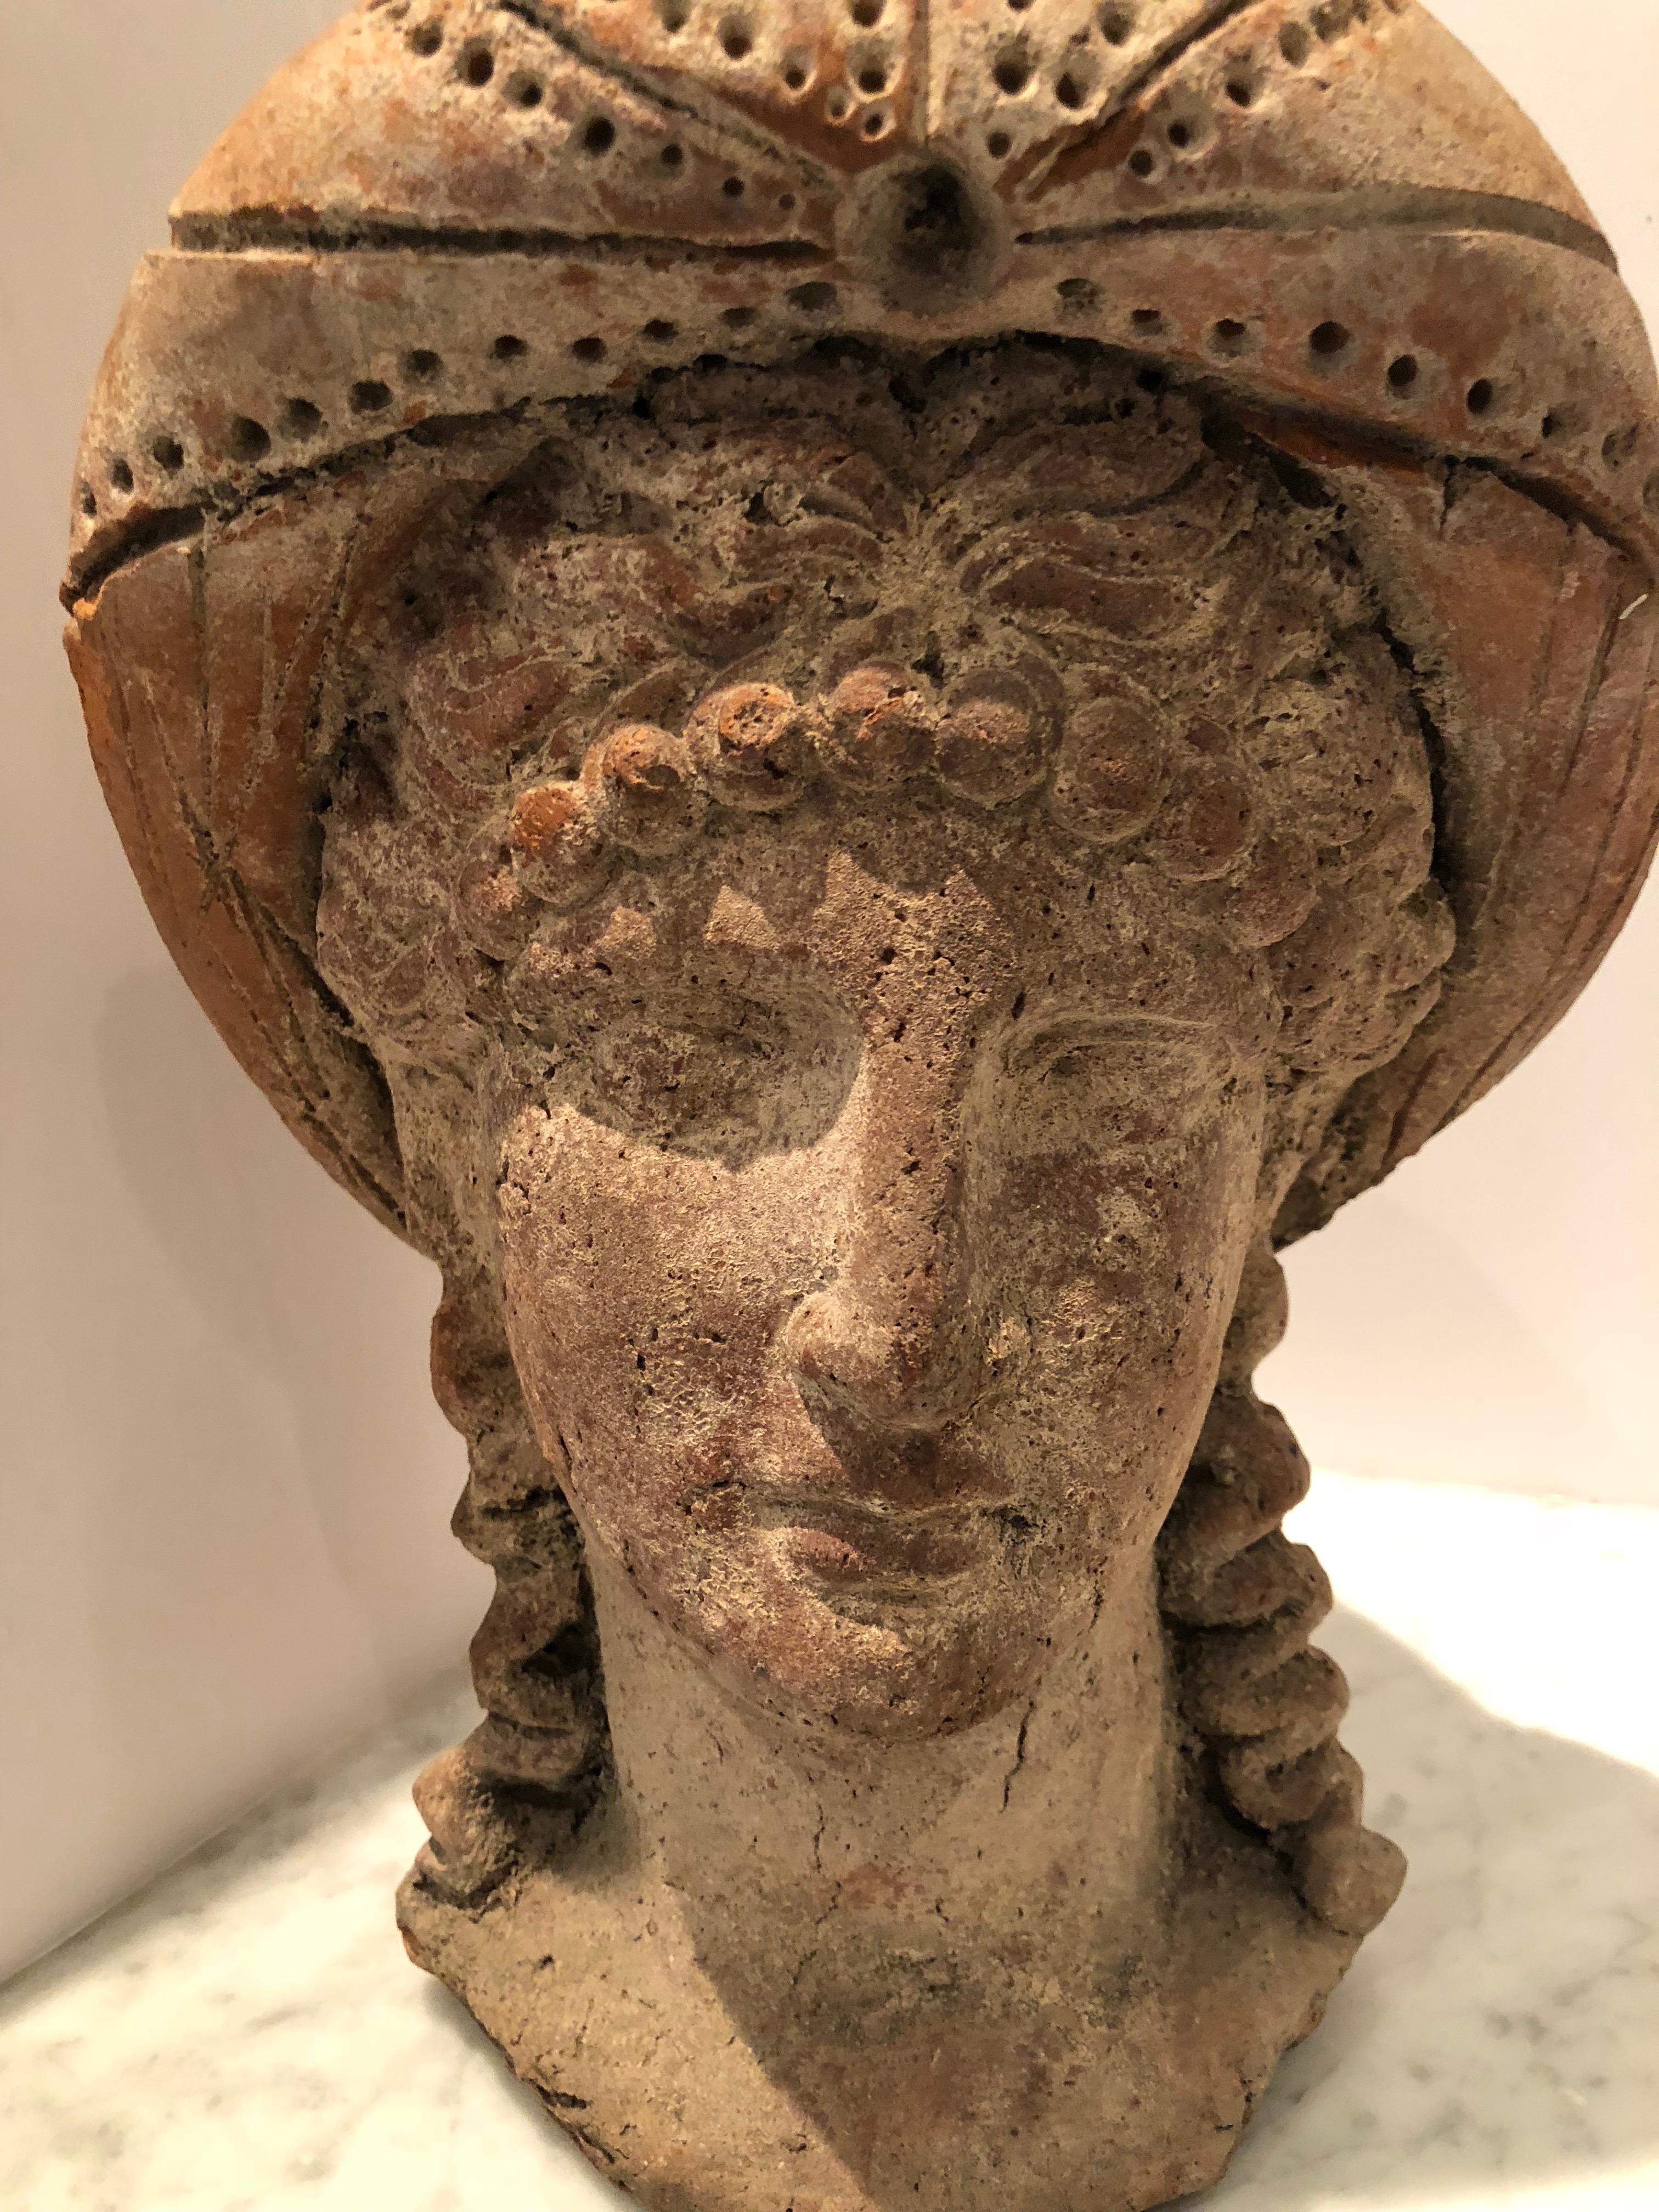 Beautiful Etruscan style head of a youthful girl. The sculpture is hollow, having thick walls. The girl is depicted with long hair wearing an elaborate head dress. Dates to just after the Grand Tour. Acquired from a private collection.